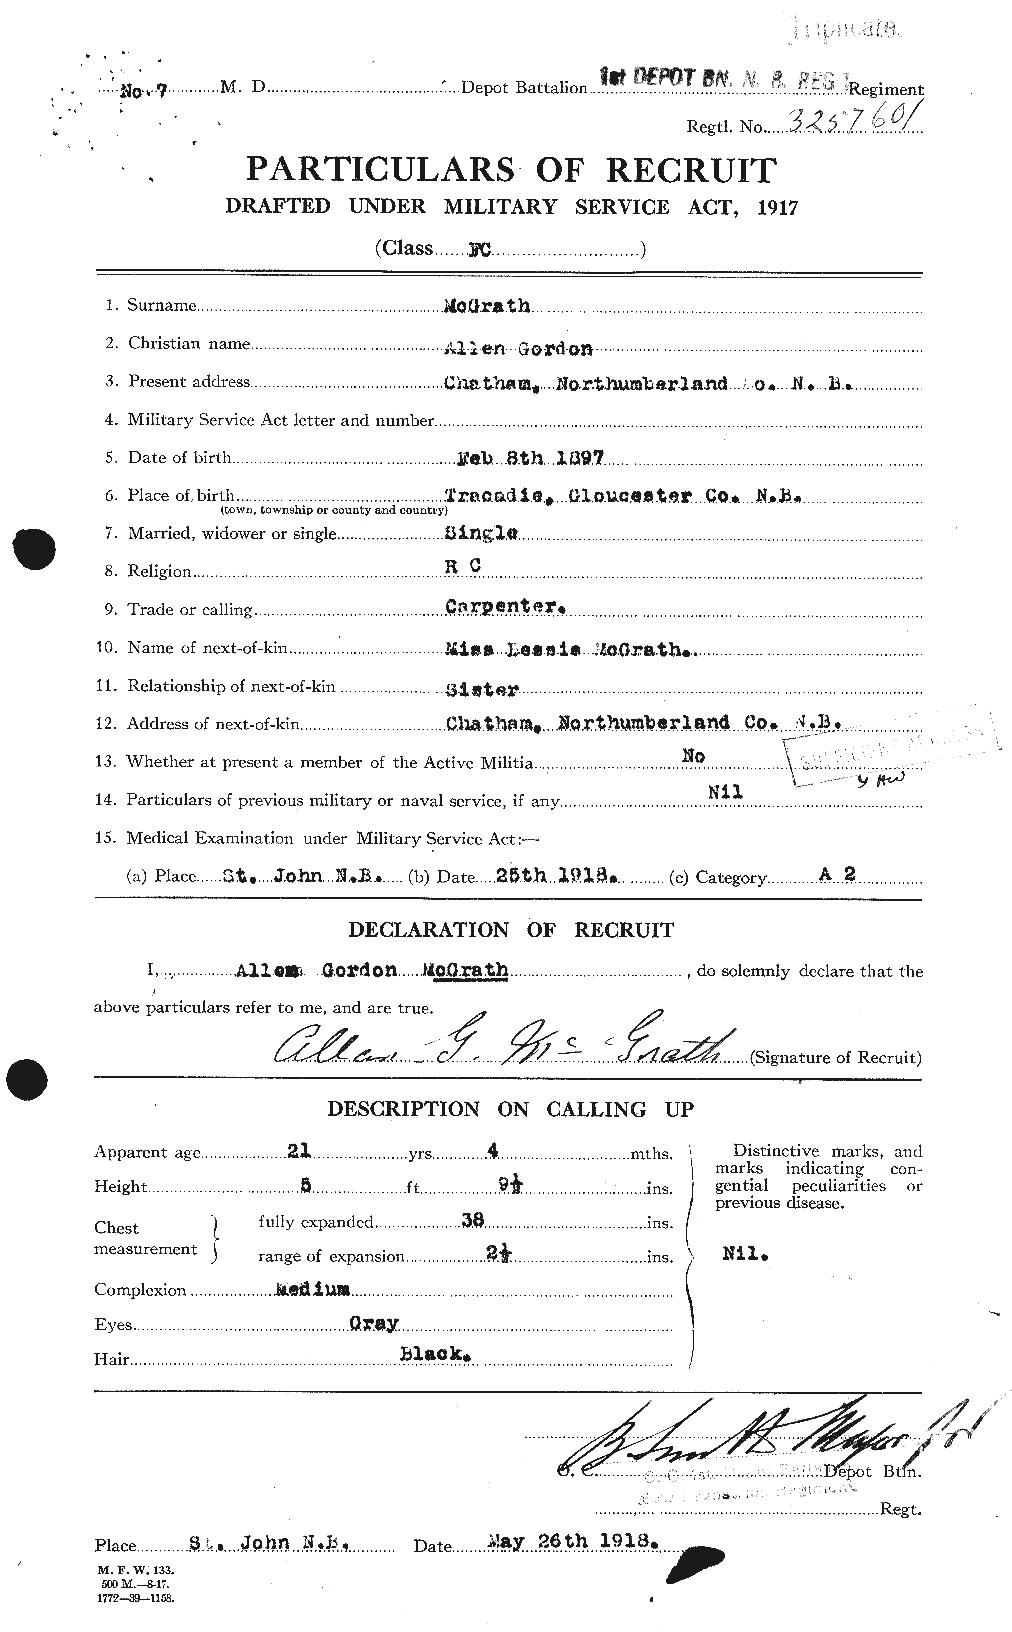 Personnel Records of the First World War - CEF 523522a